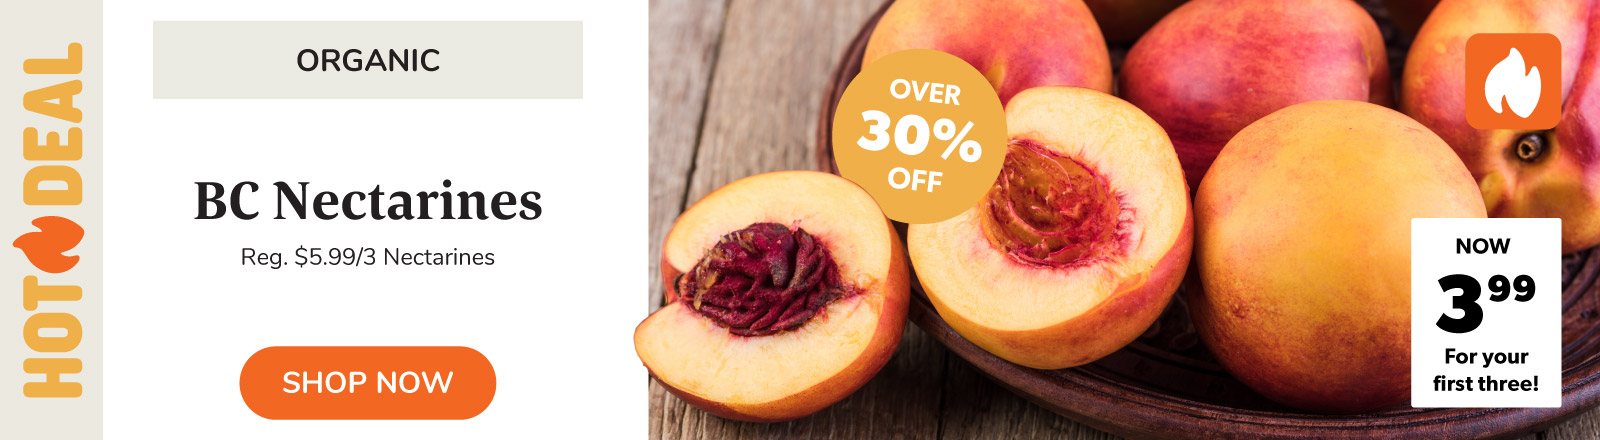 Save on BC Nectarines this week 